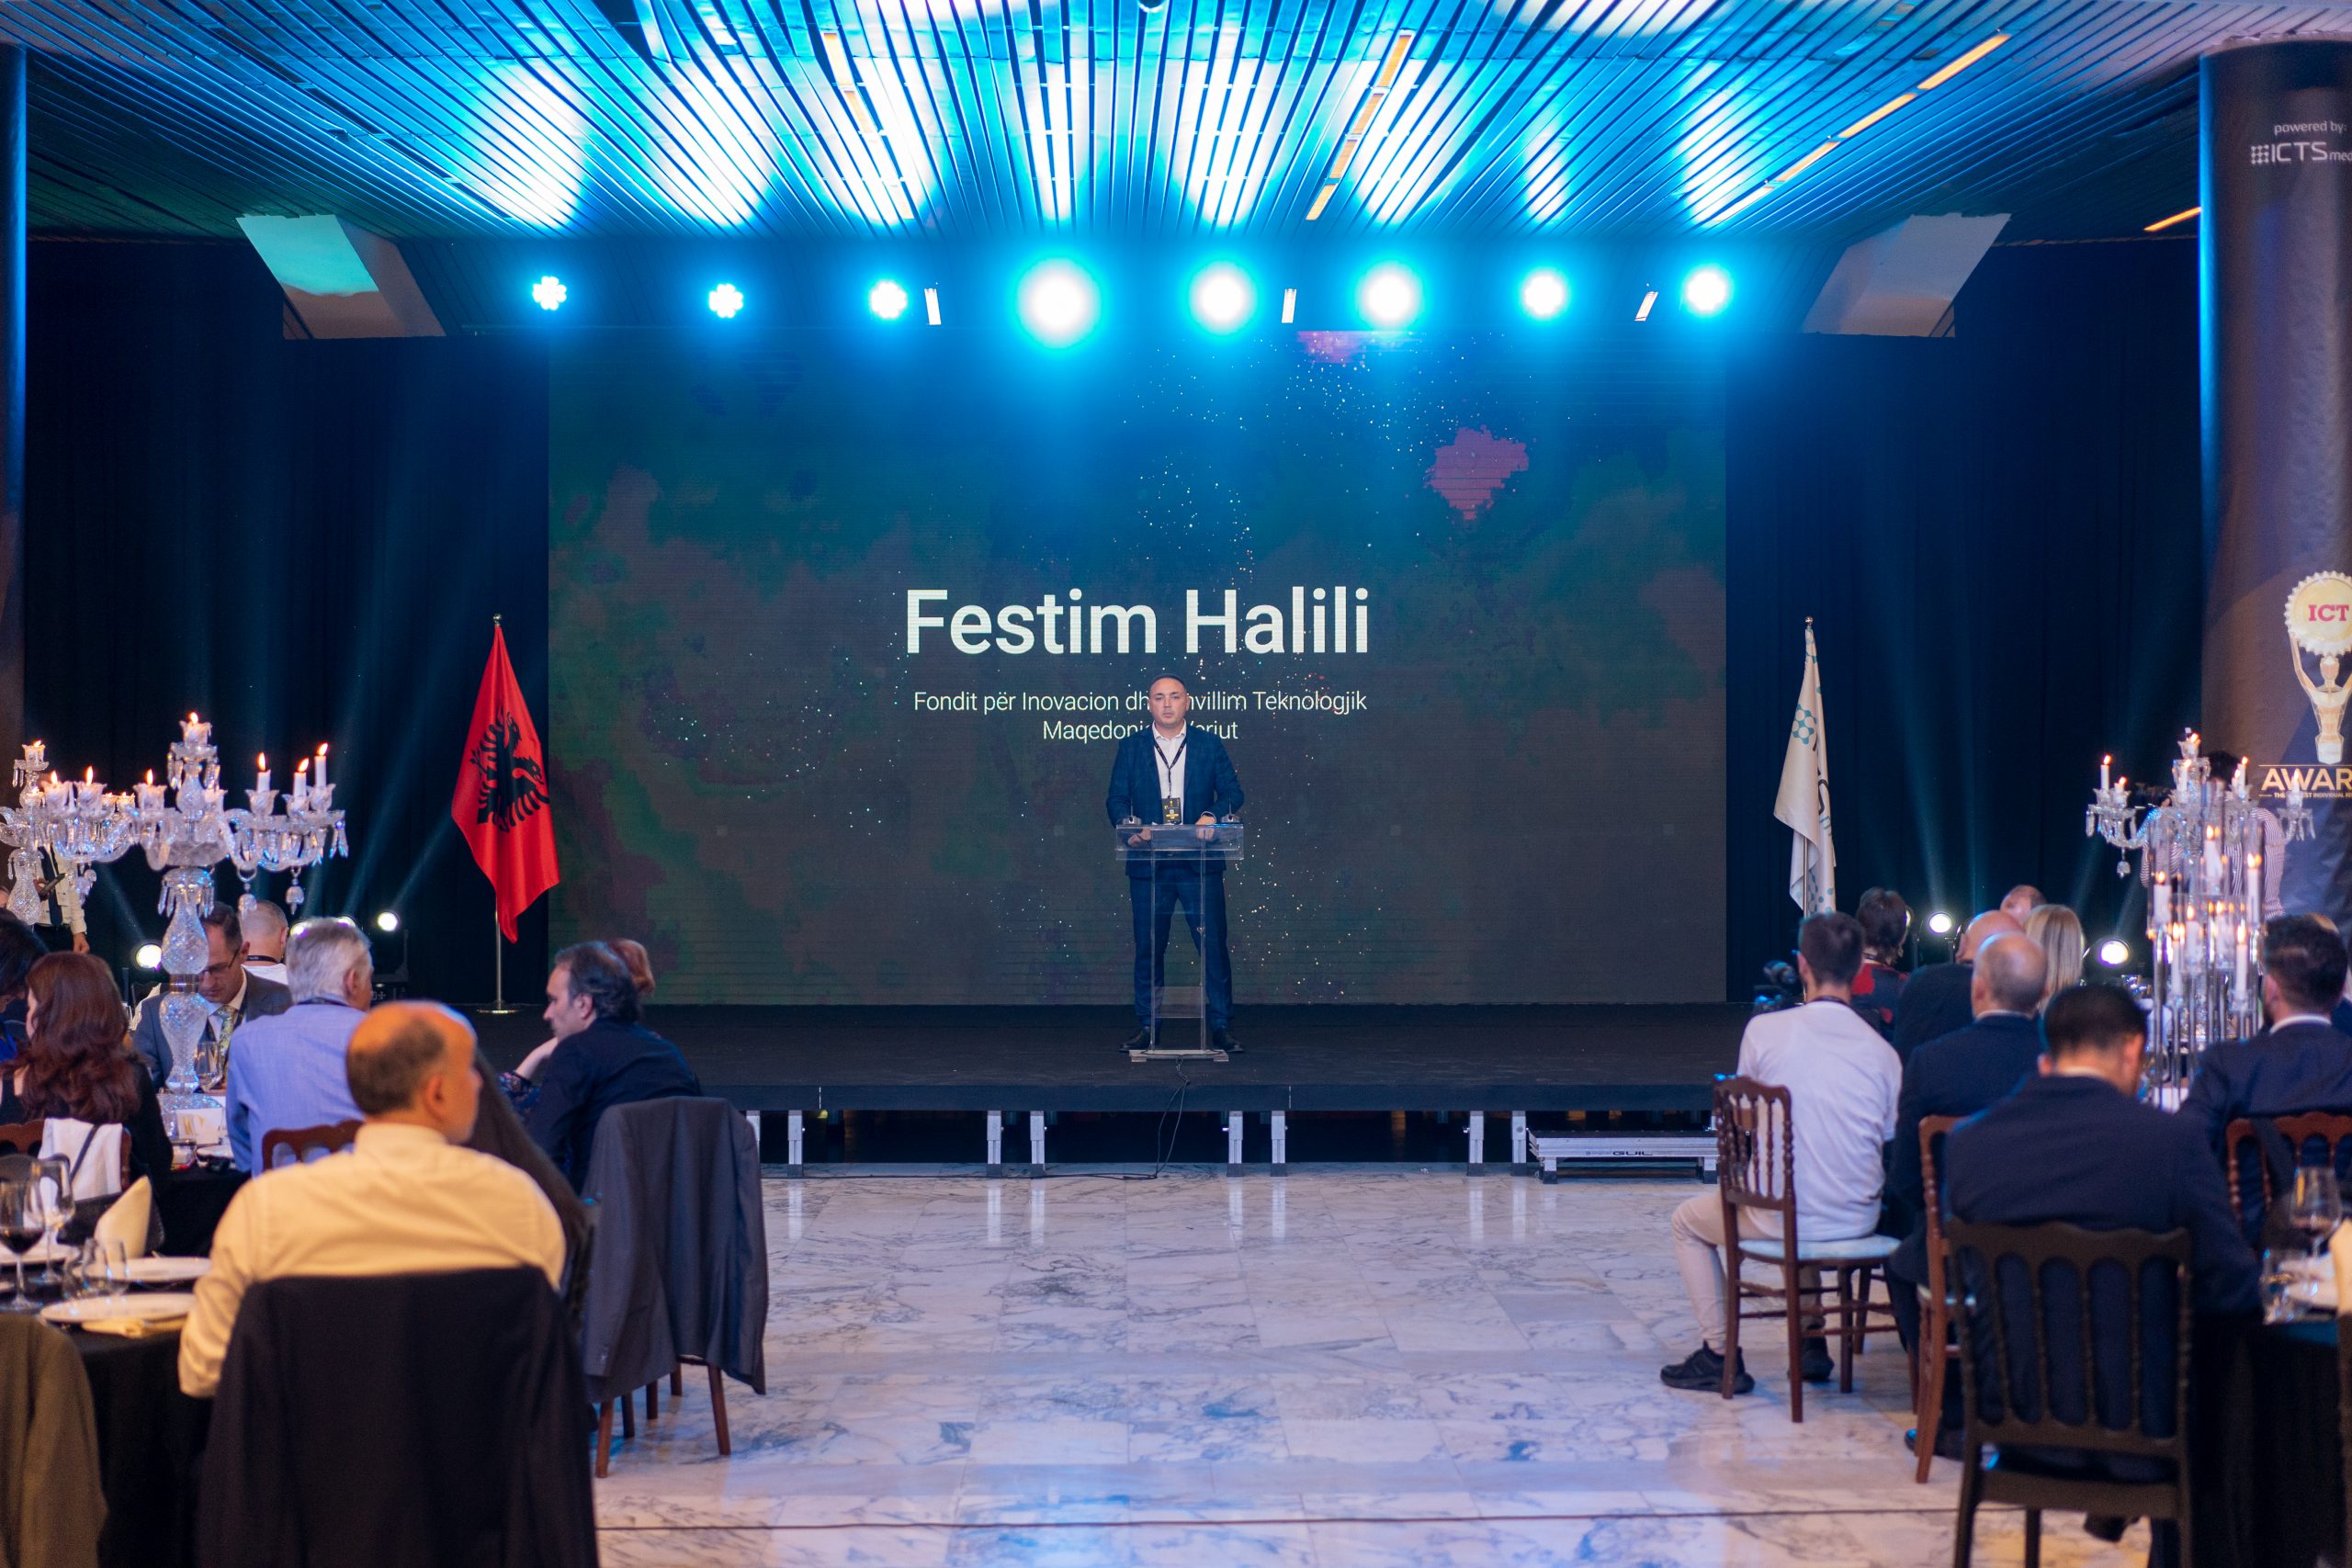 DFITD Festim Halili attended the Albanian Awards for Leading Innovation – Information and Communication Technology